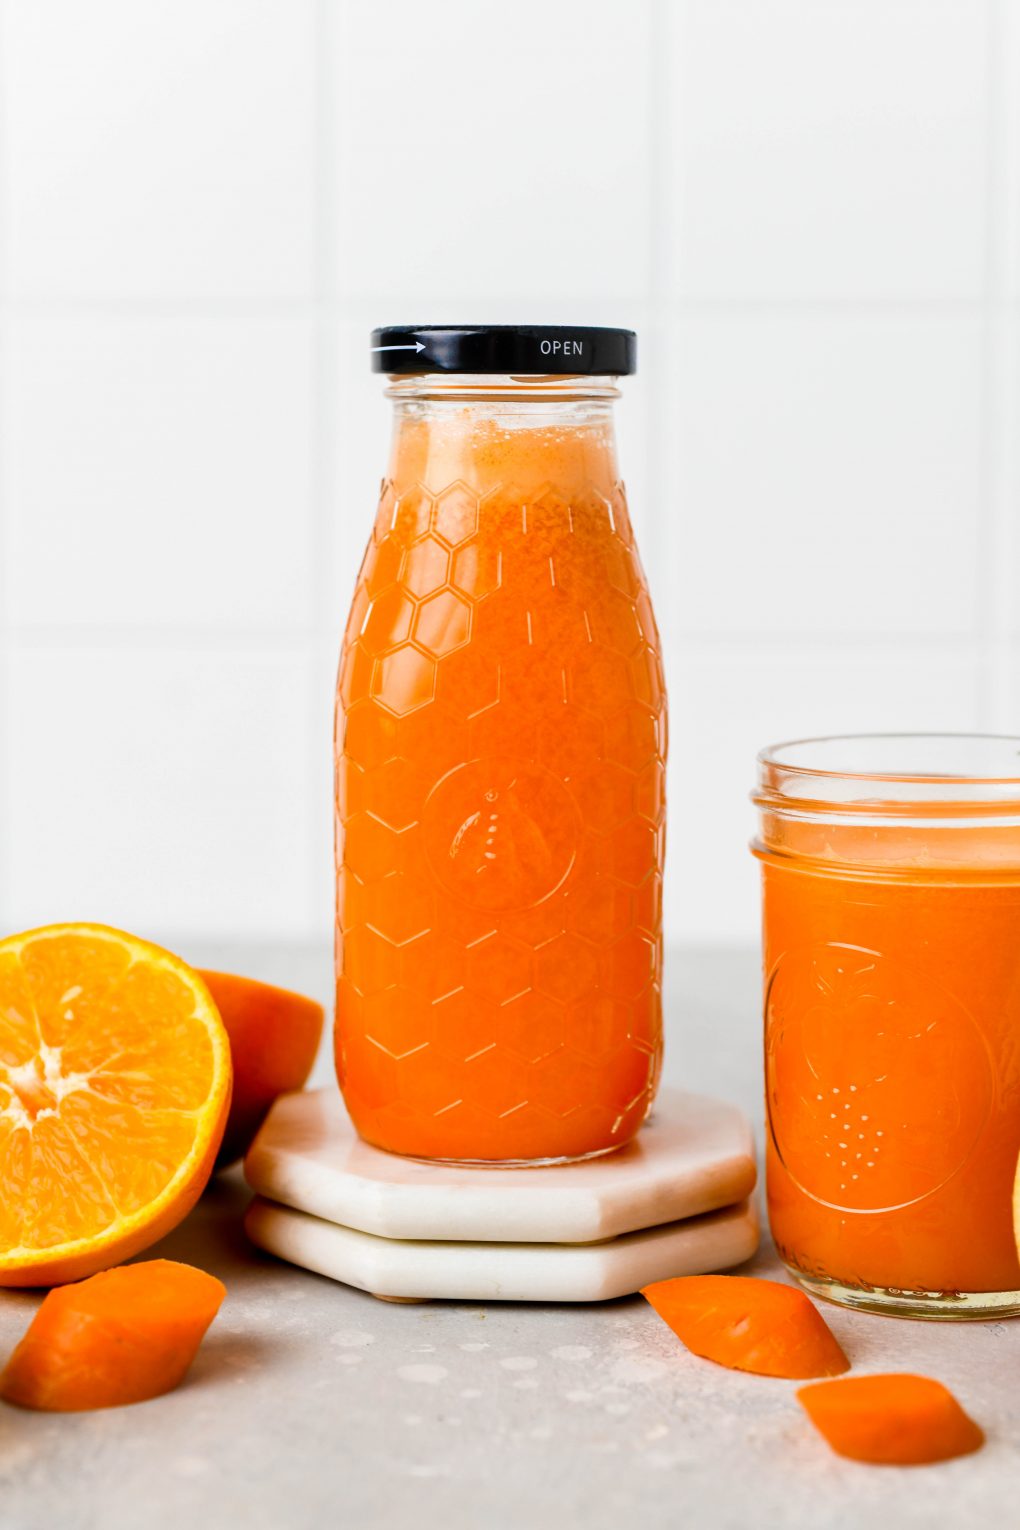 Straight on shot of a textured glass jar filled to the brim with bright orange carrot, apple, and orange juice with ginger. Next to some cut oranges, and carrot pieces, on a light colored background.